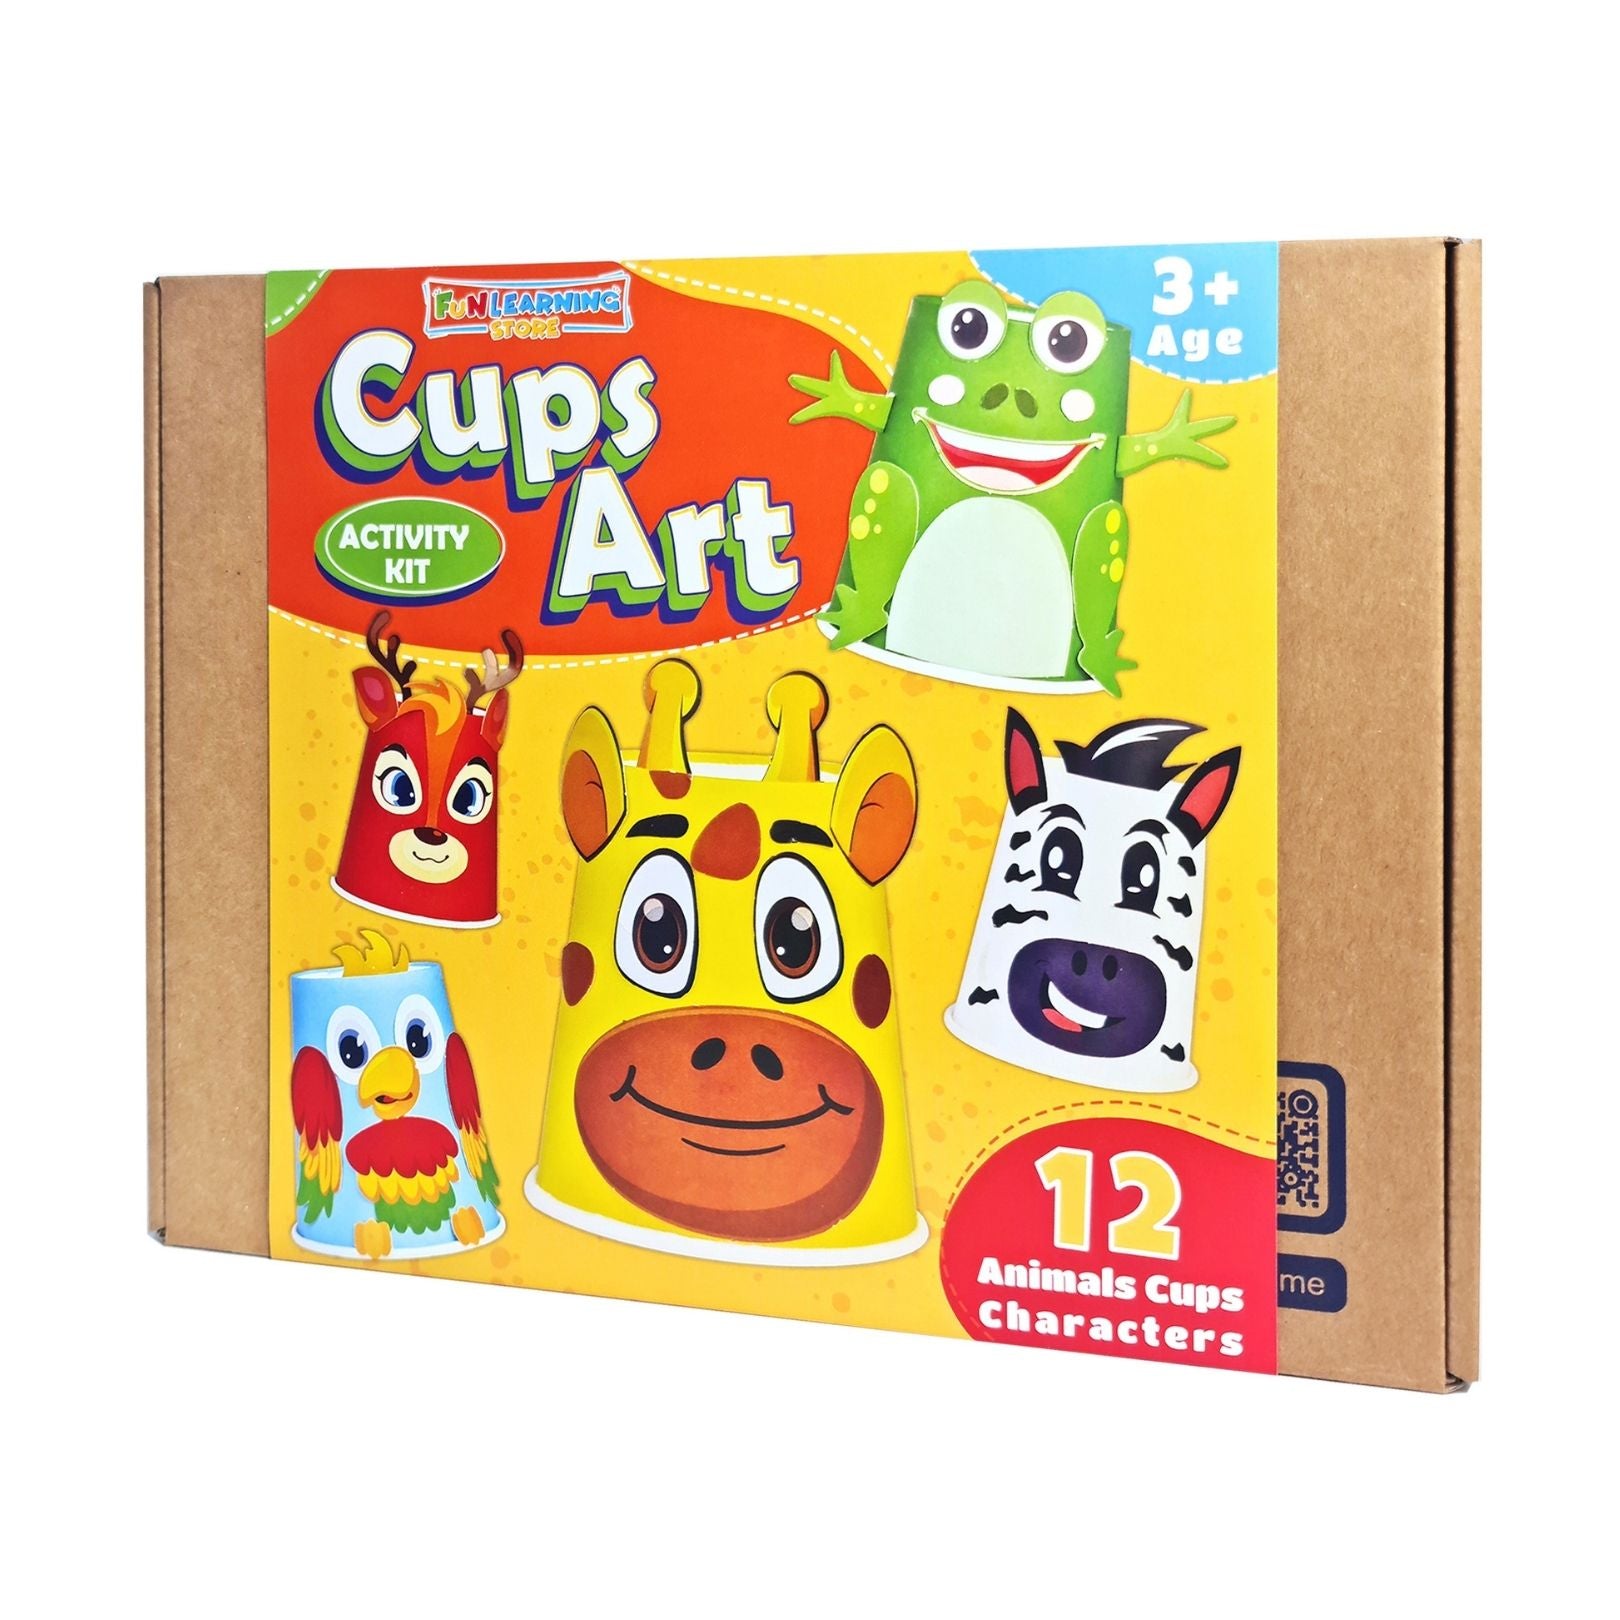 Cups Art Activity Kit For Kids